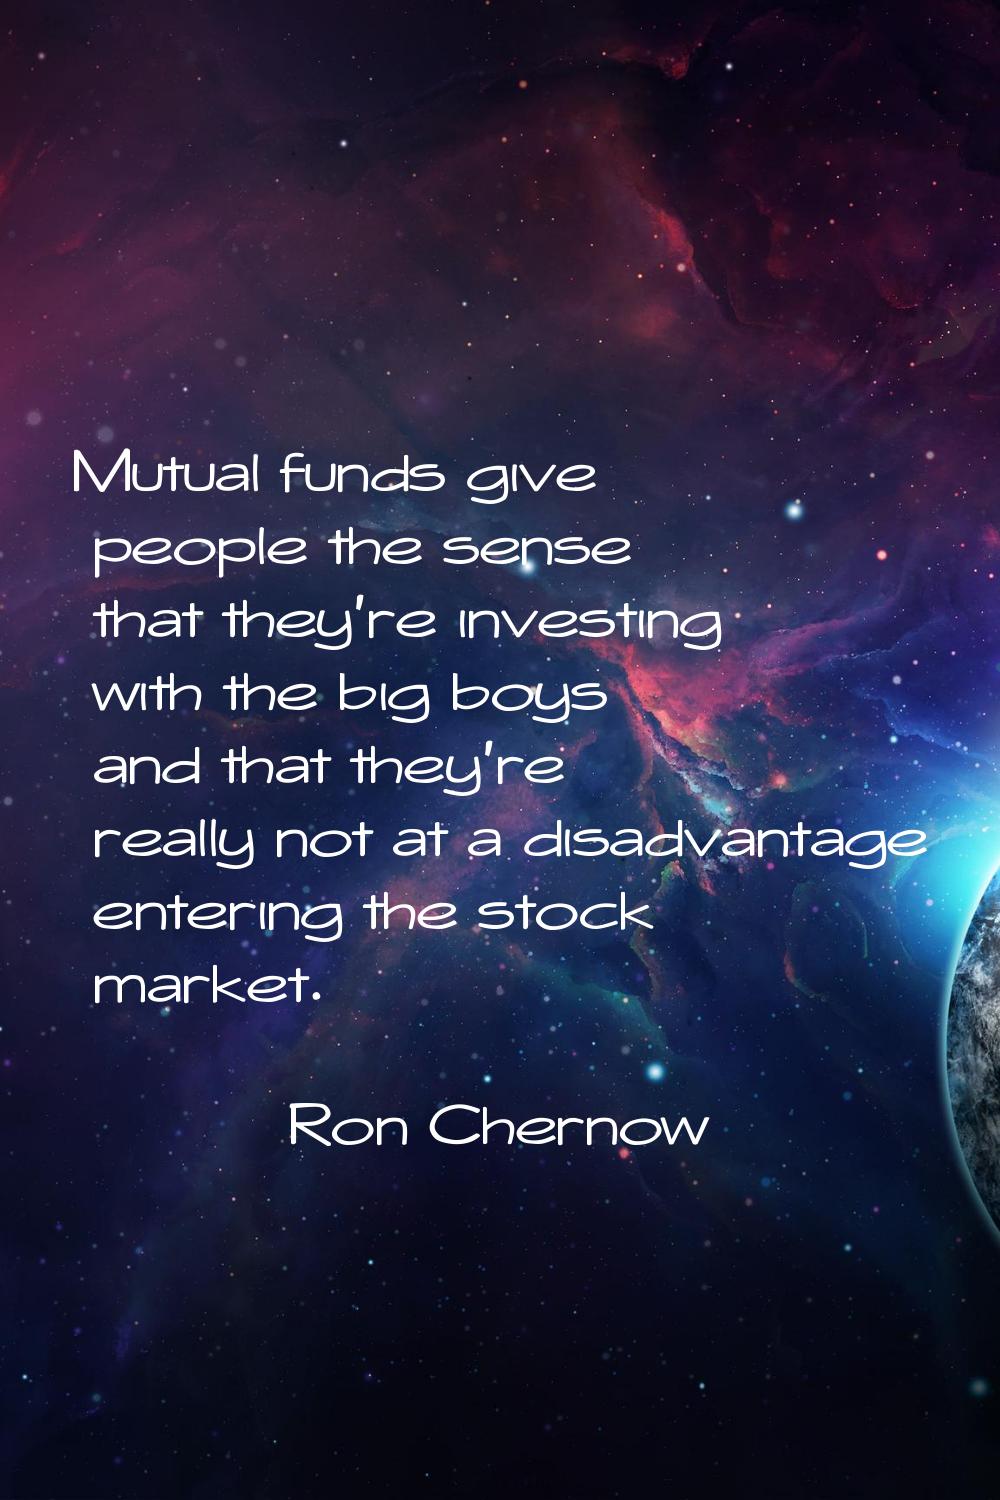 Mutual funds give people the sense that they're investing with the big boys and that they're really